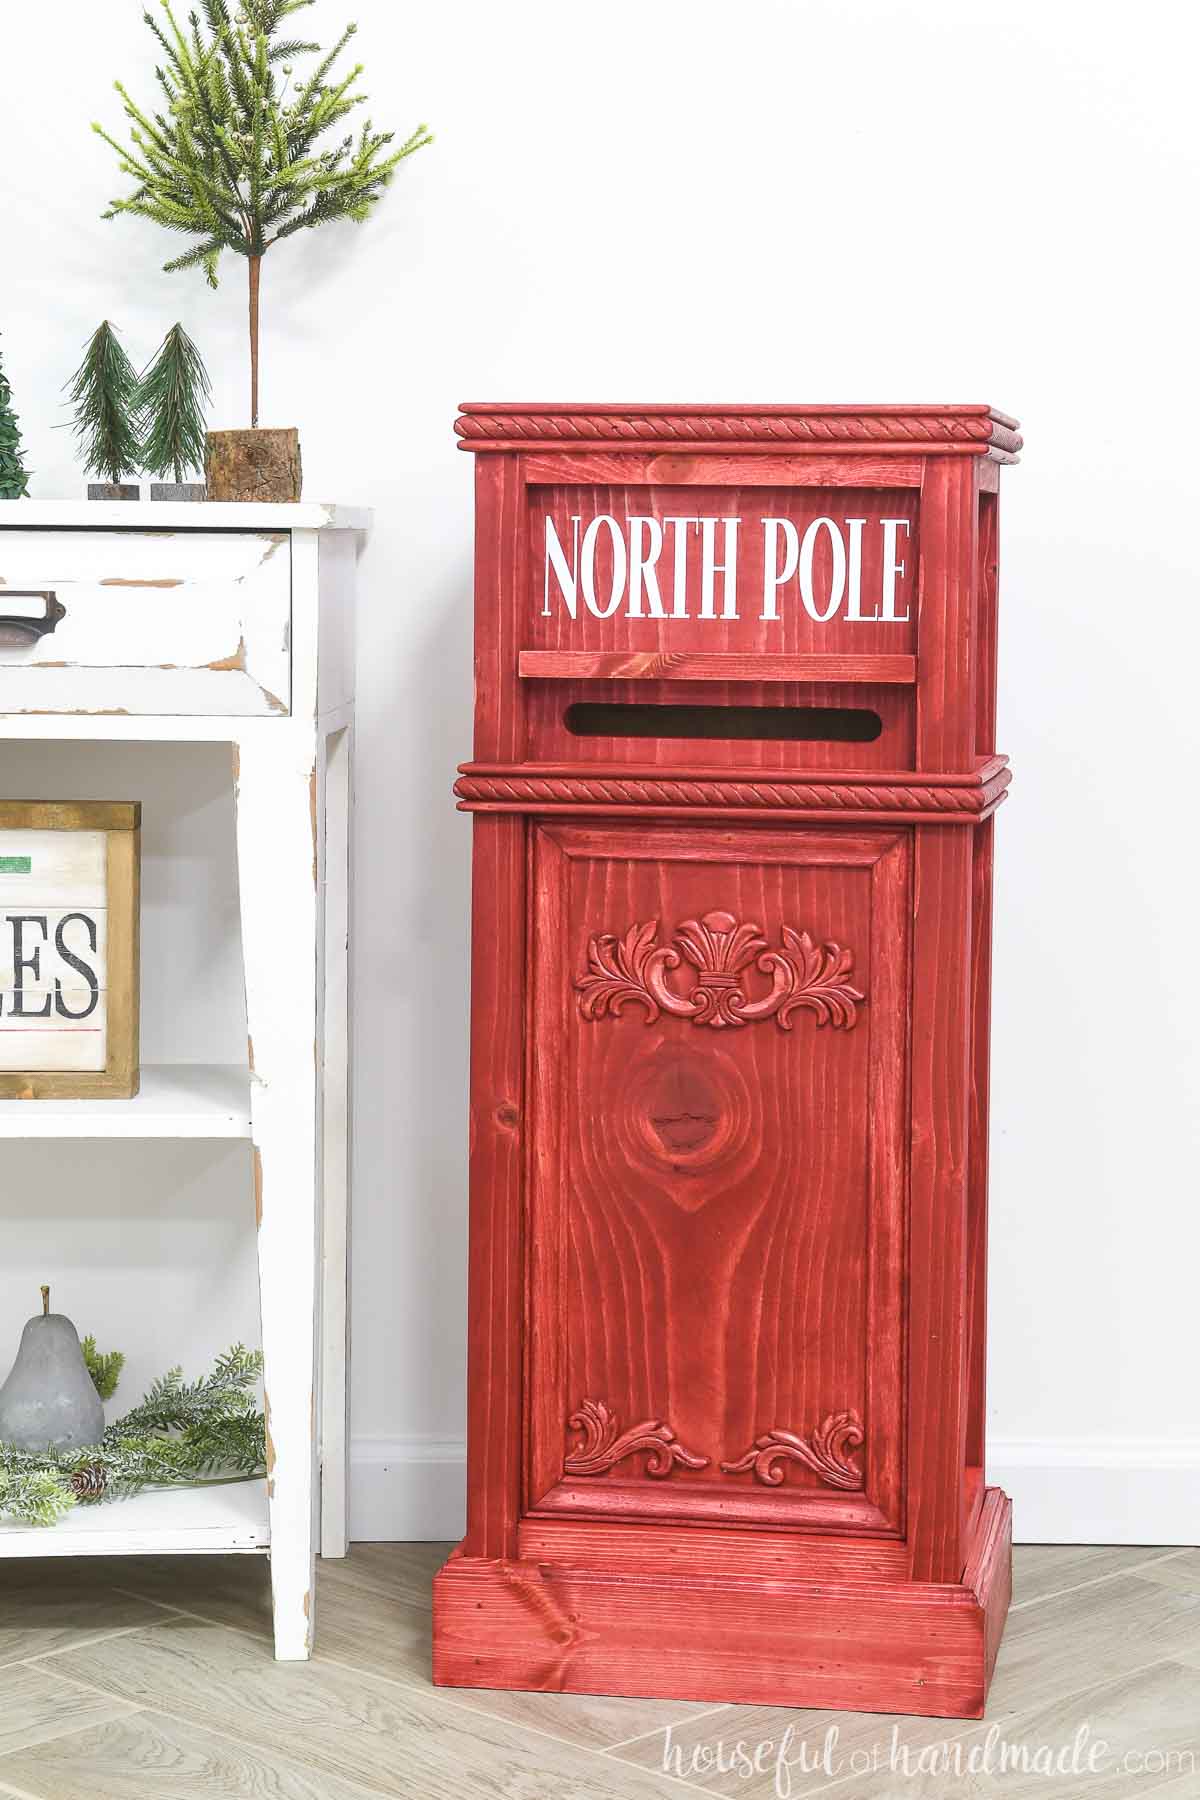 Red stained wood Santa mailbox with North Pole in white on the top. 